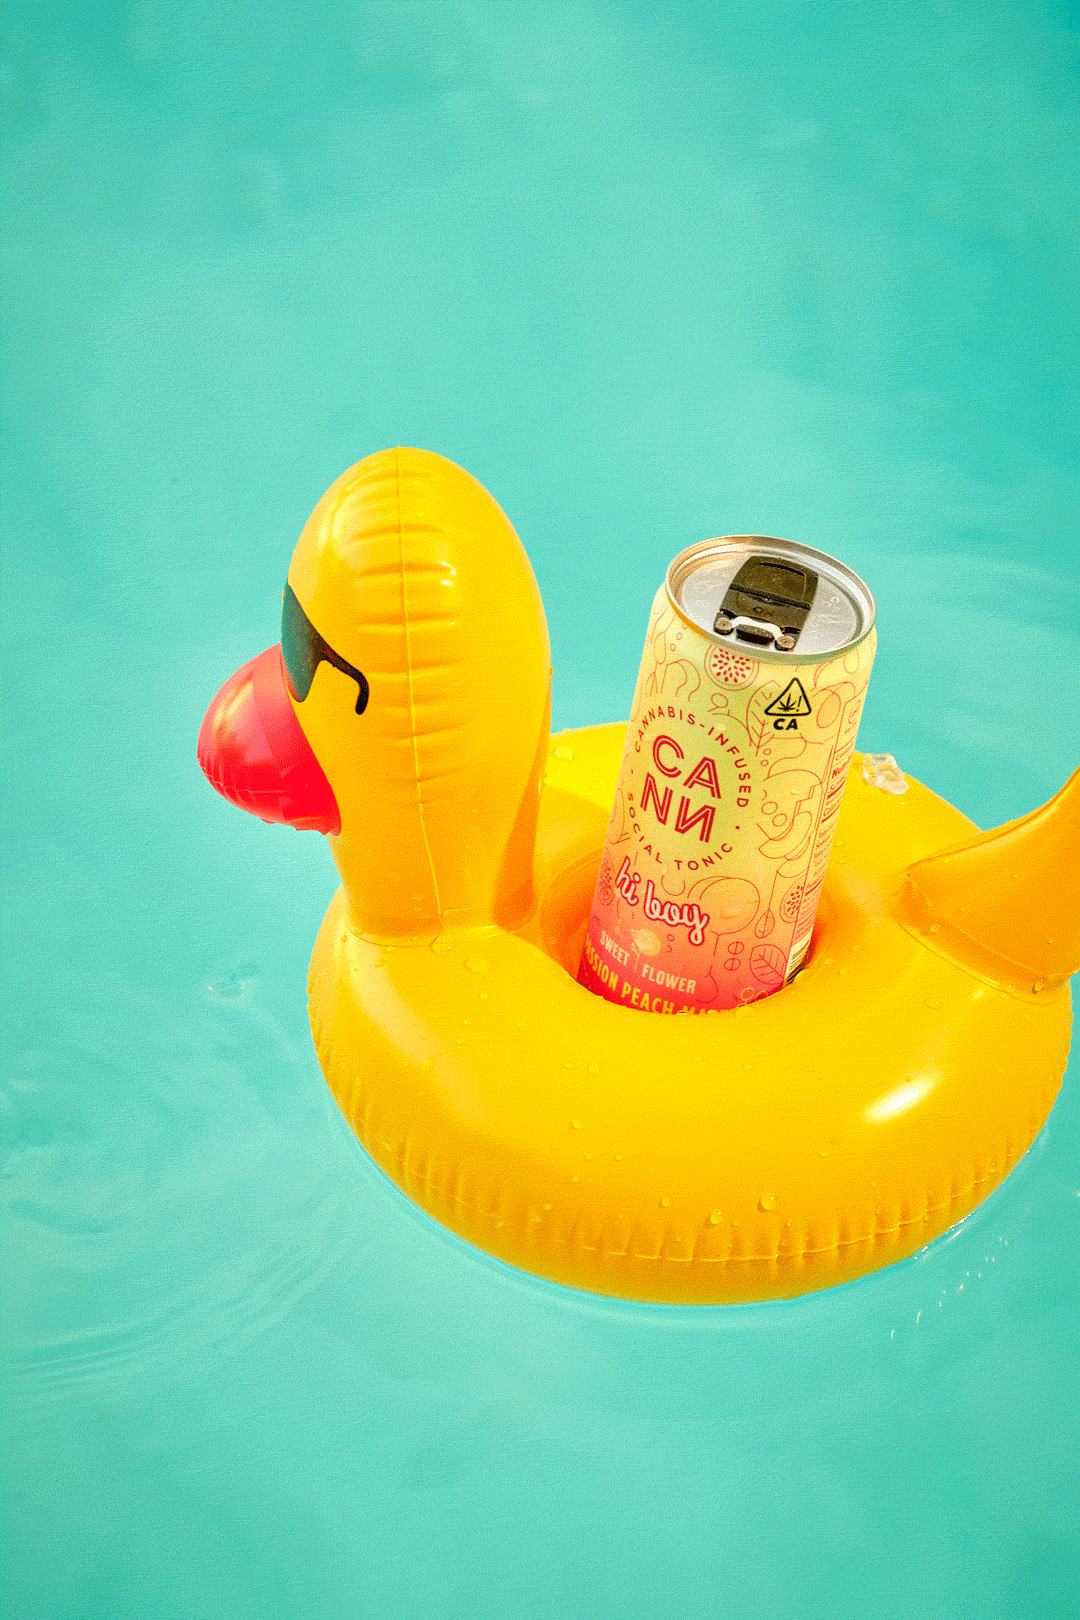 A yellow beverage can in a duck-shaped pool float.